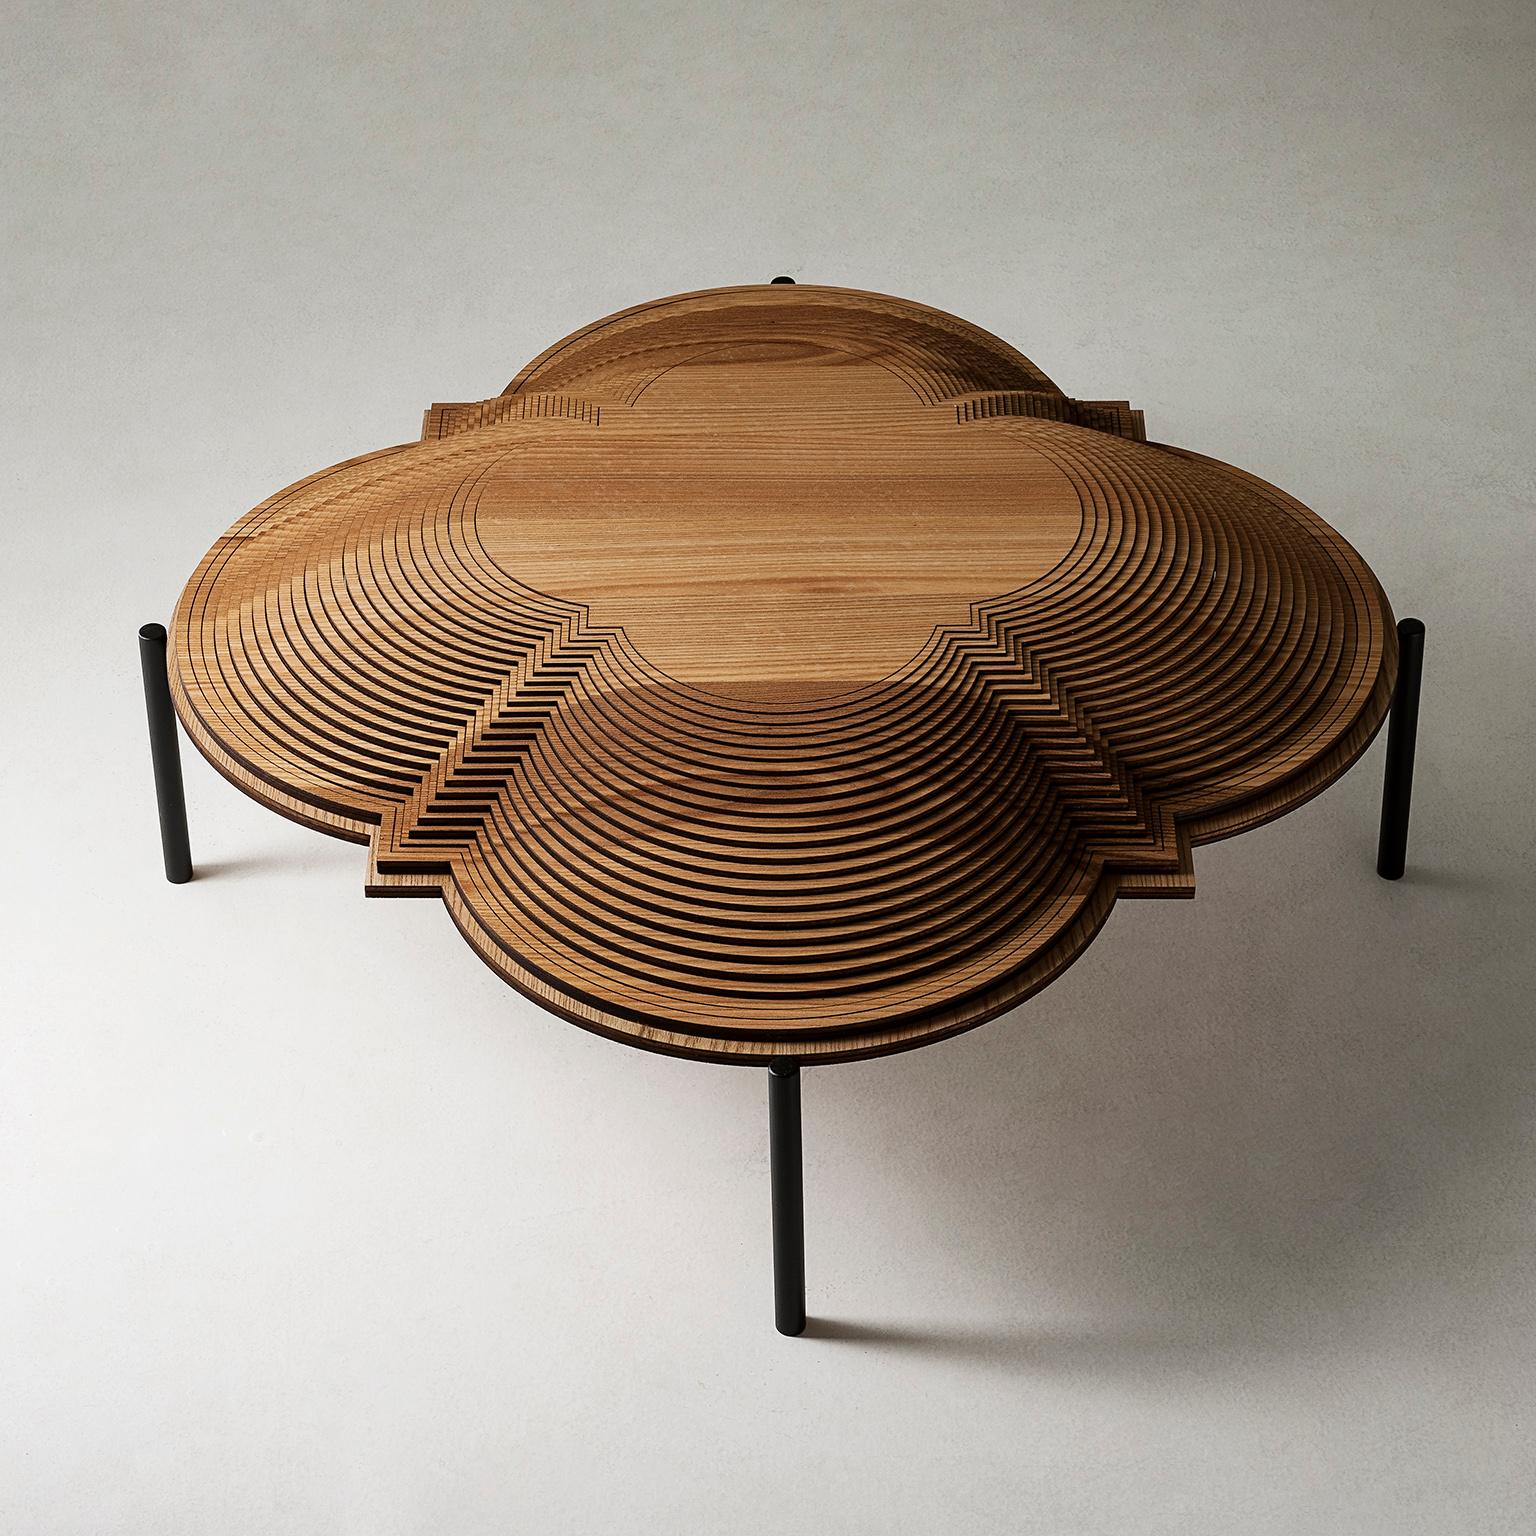 sculptural coffee table